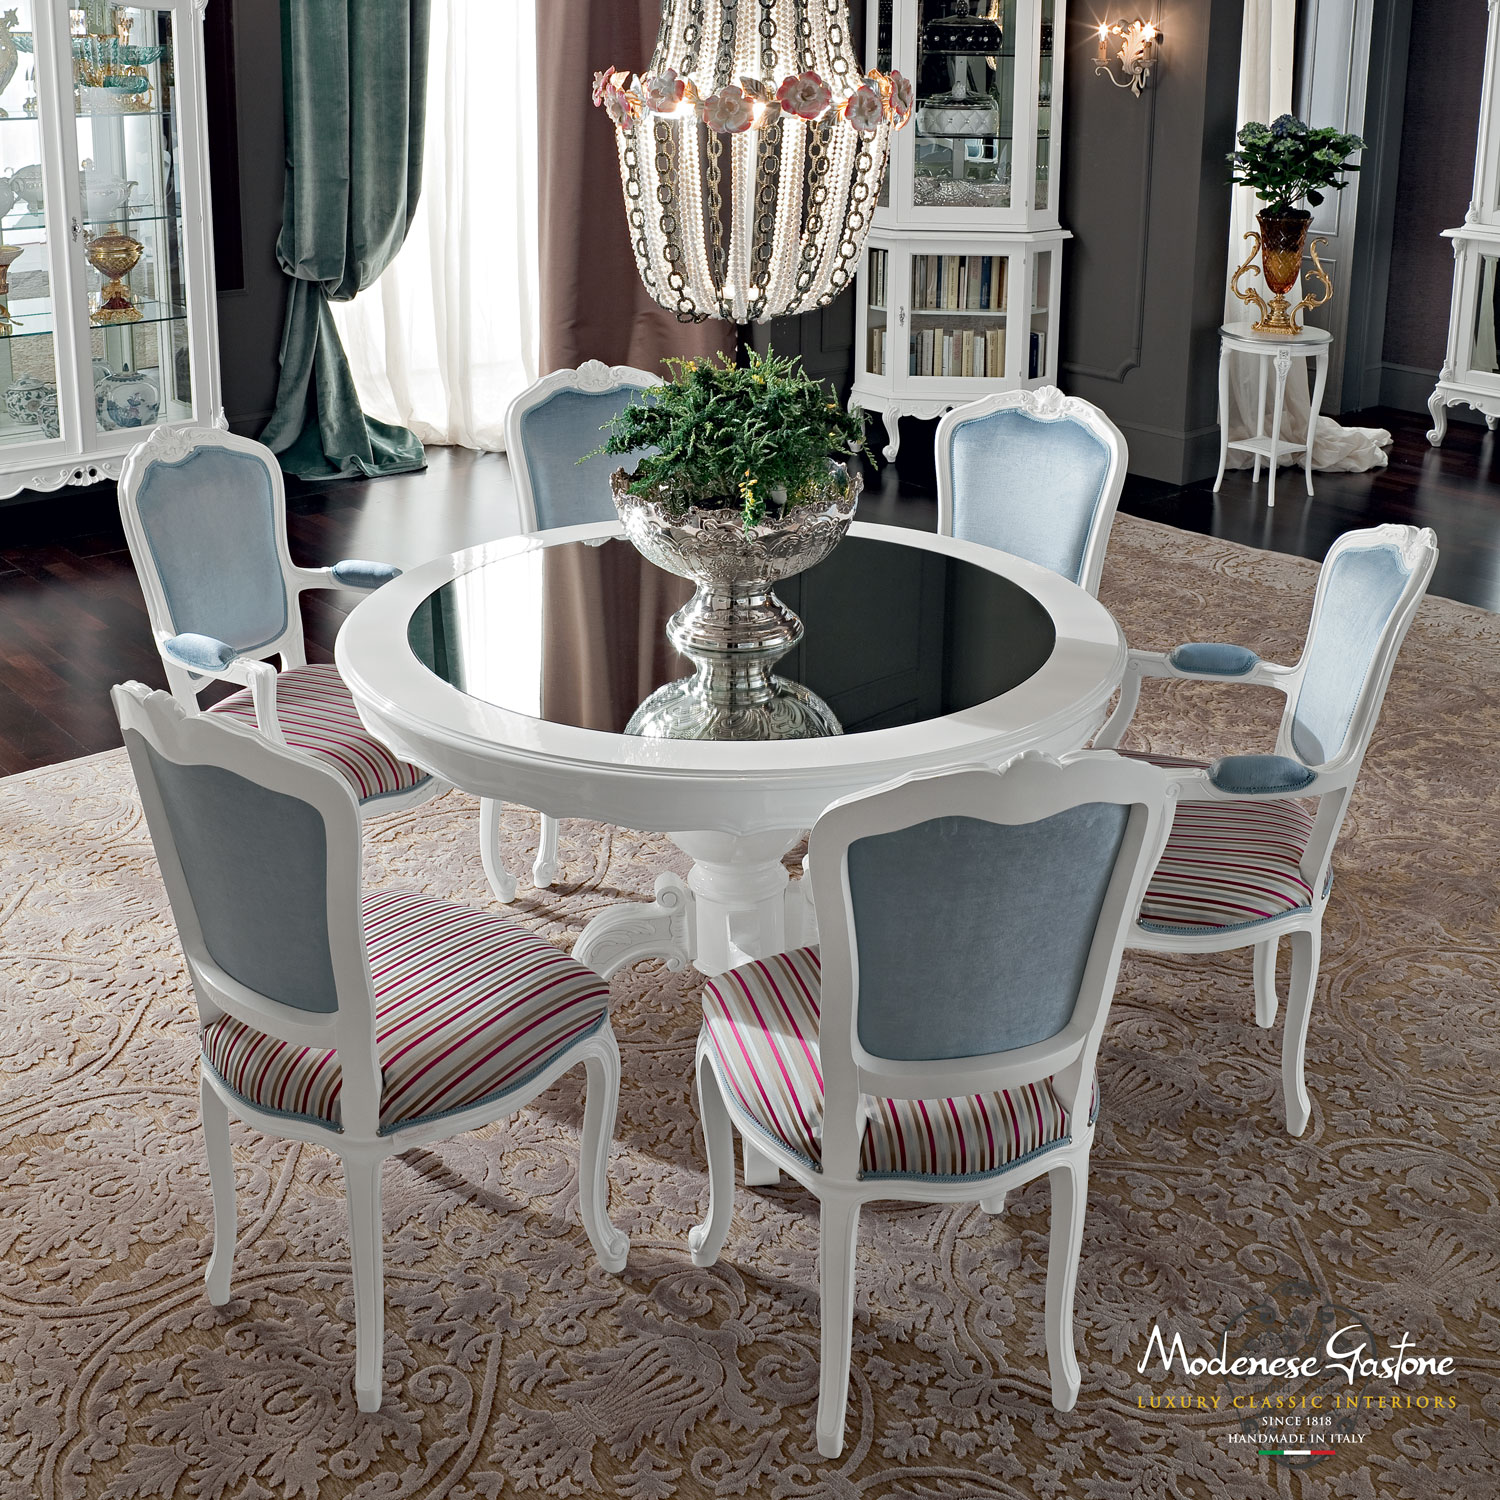 Fashionable-dining-room-round-table-with-mirror-top-Casanova-collection-Modenese-Gastone